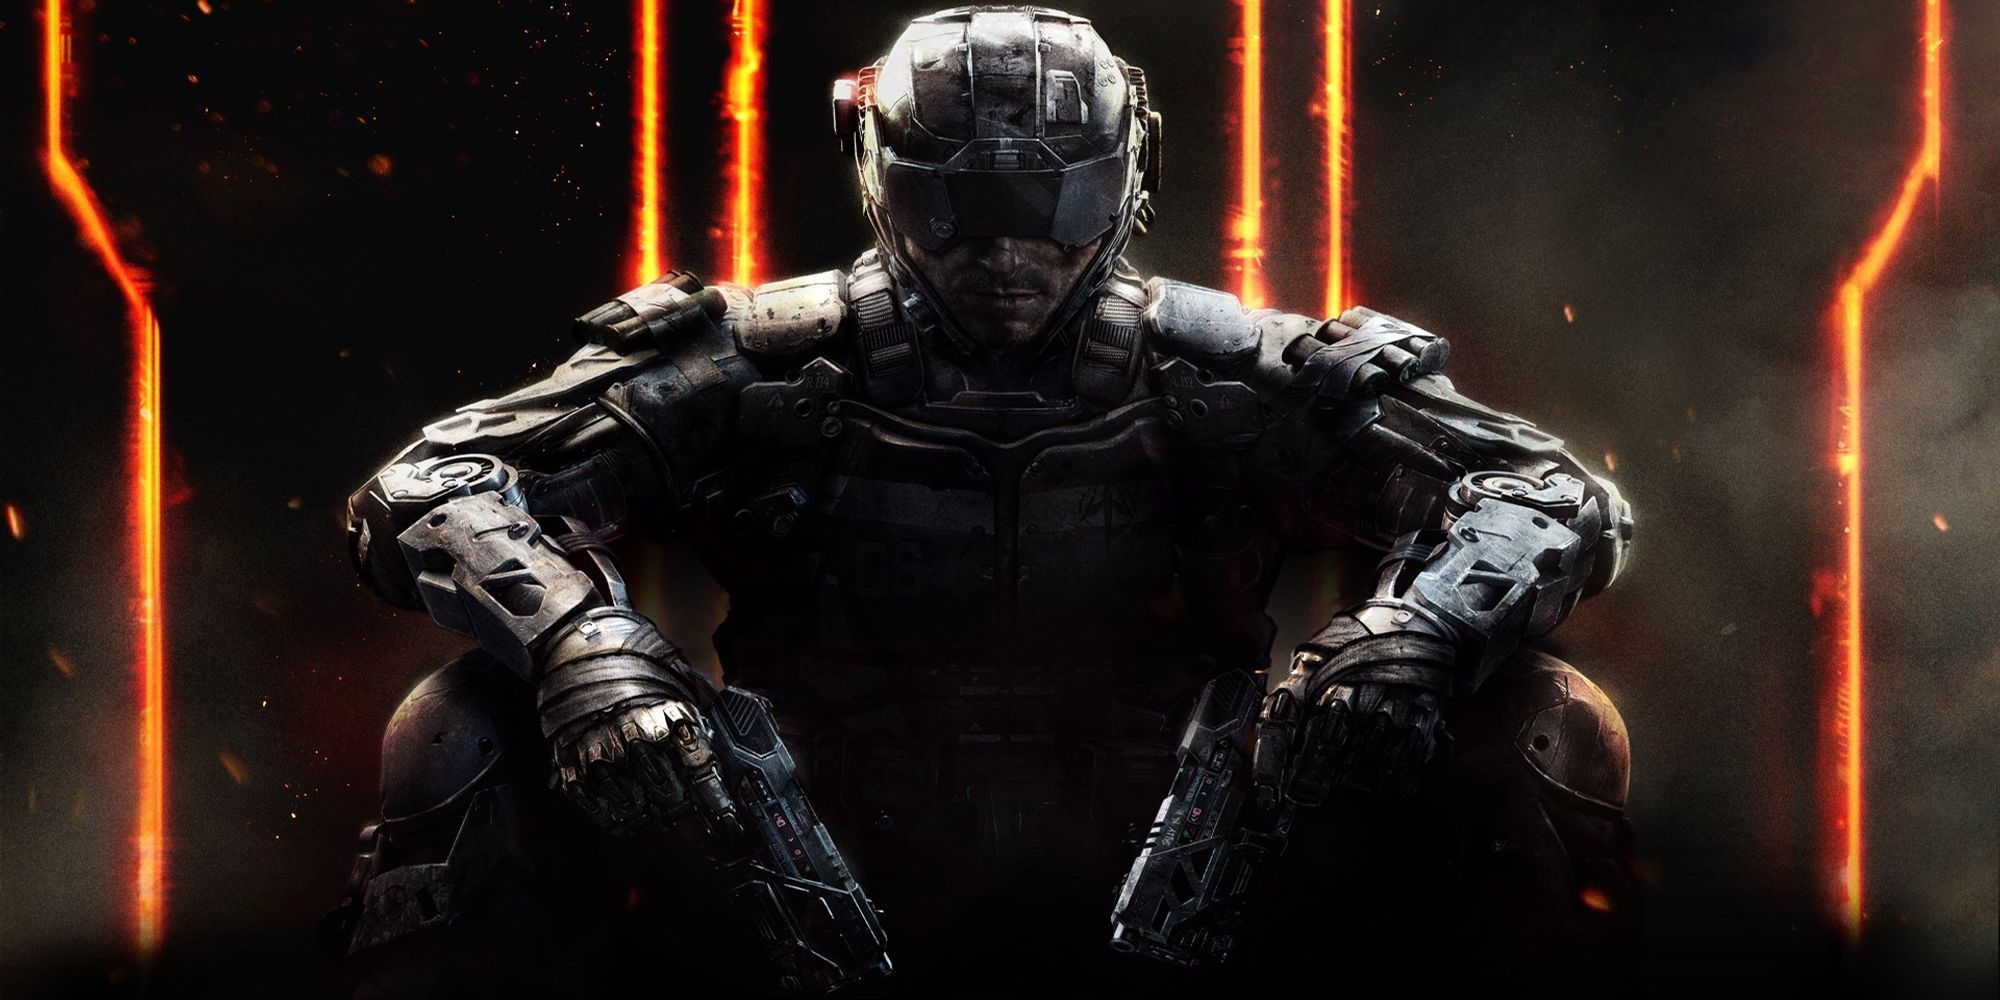 Call of Duty BO3 Game Poster Featuring Orange Romans for the number 3 in the background